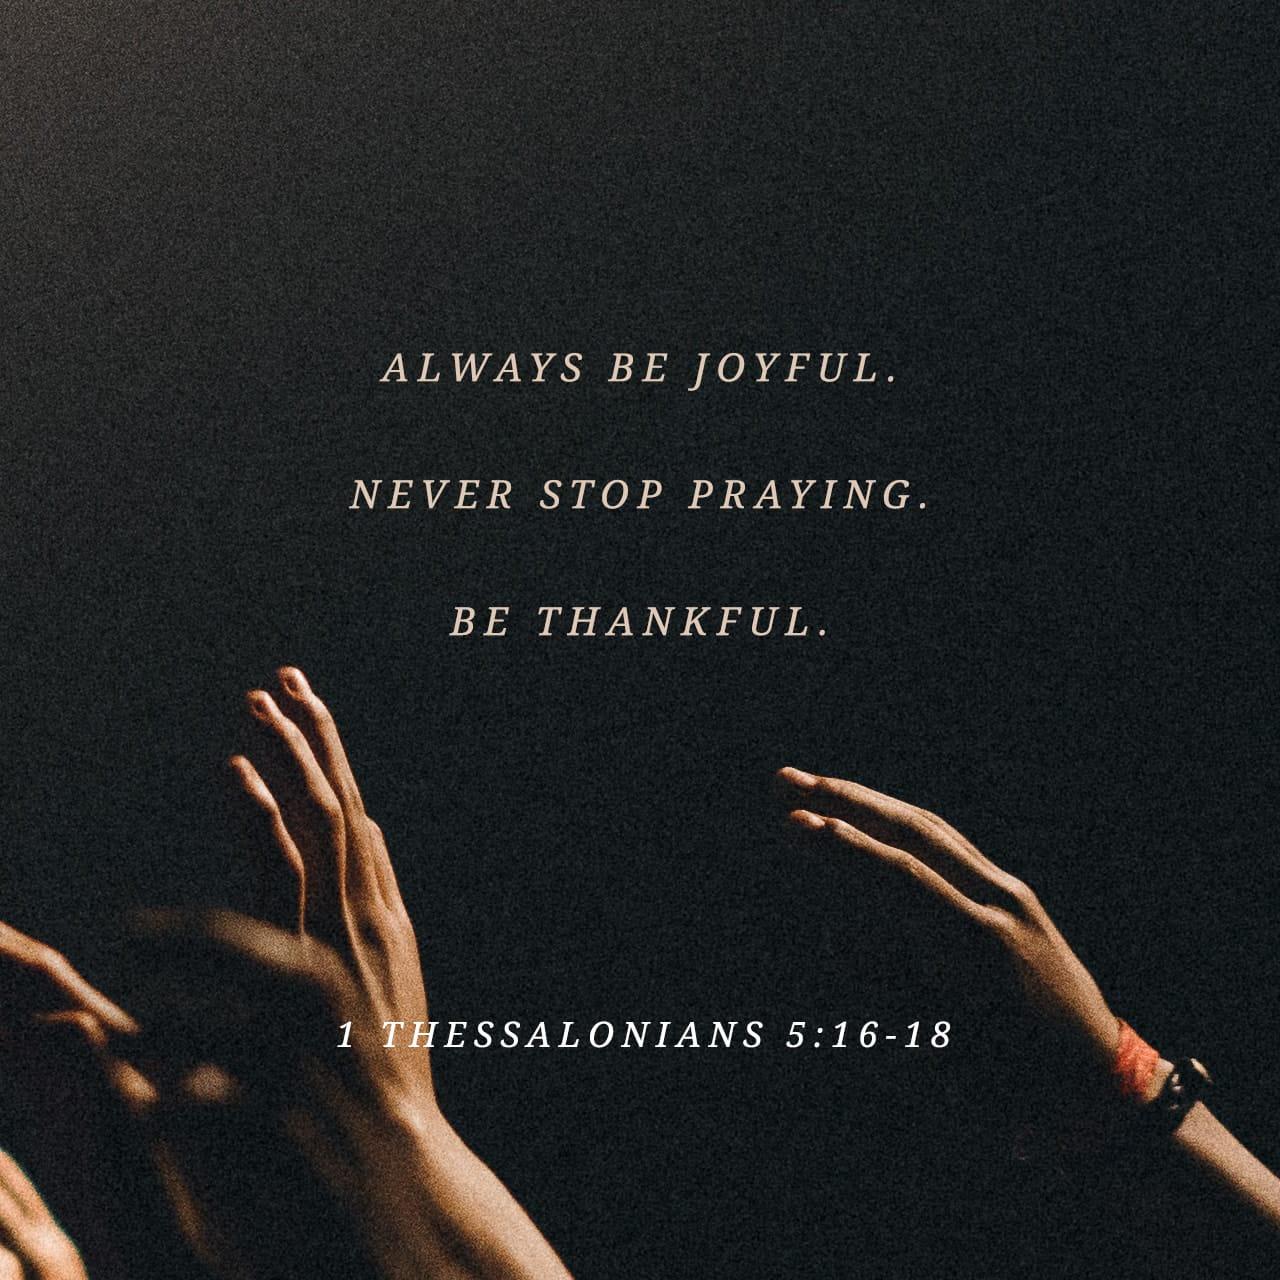 Bible Verse of the Day - day 153 - image 2192 (1 Thessalonians 5:18)